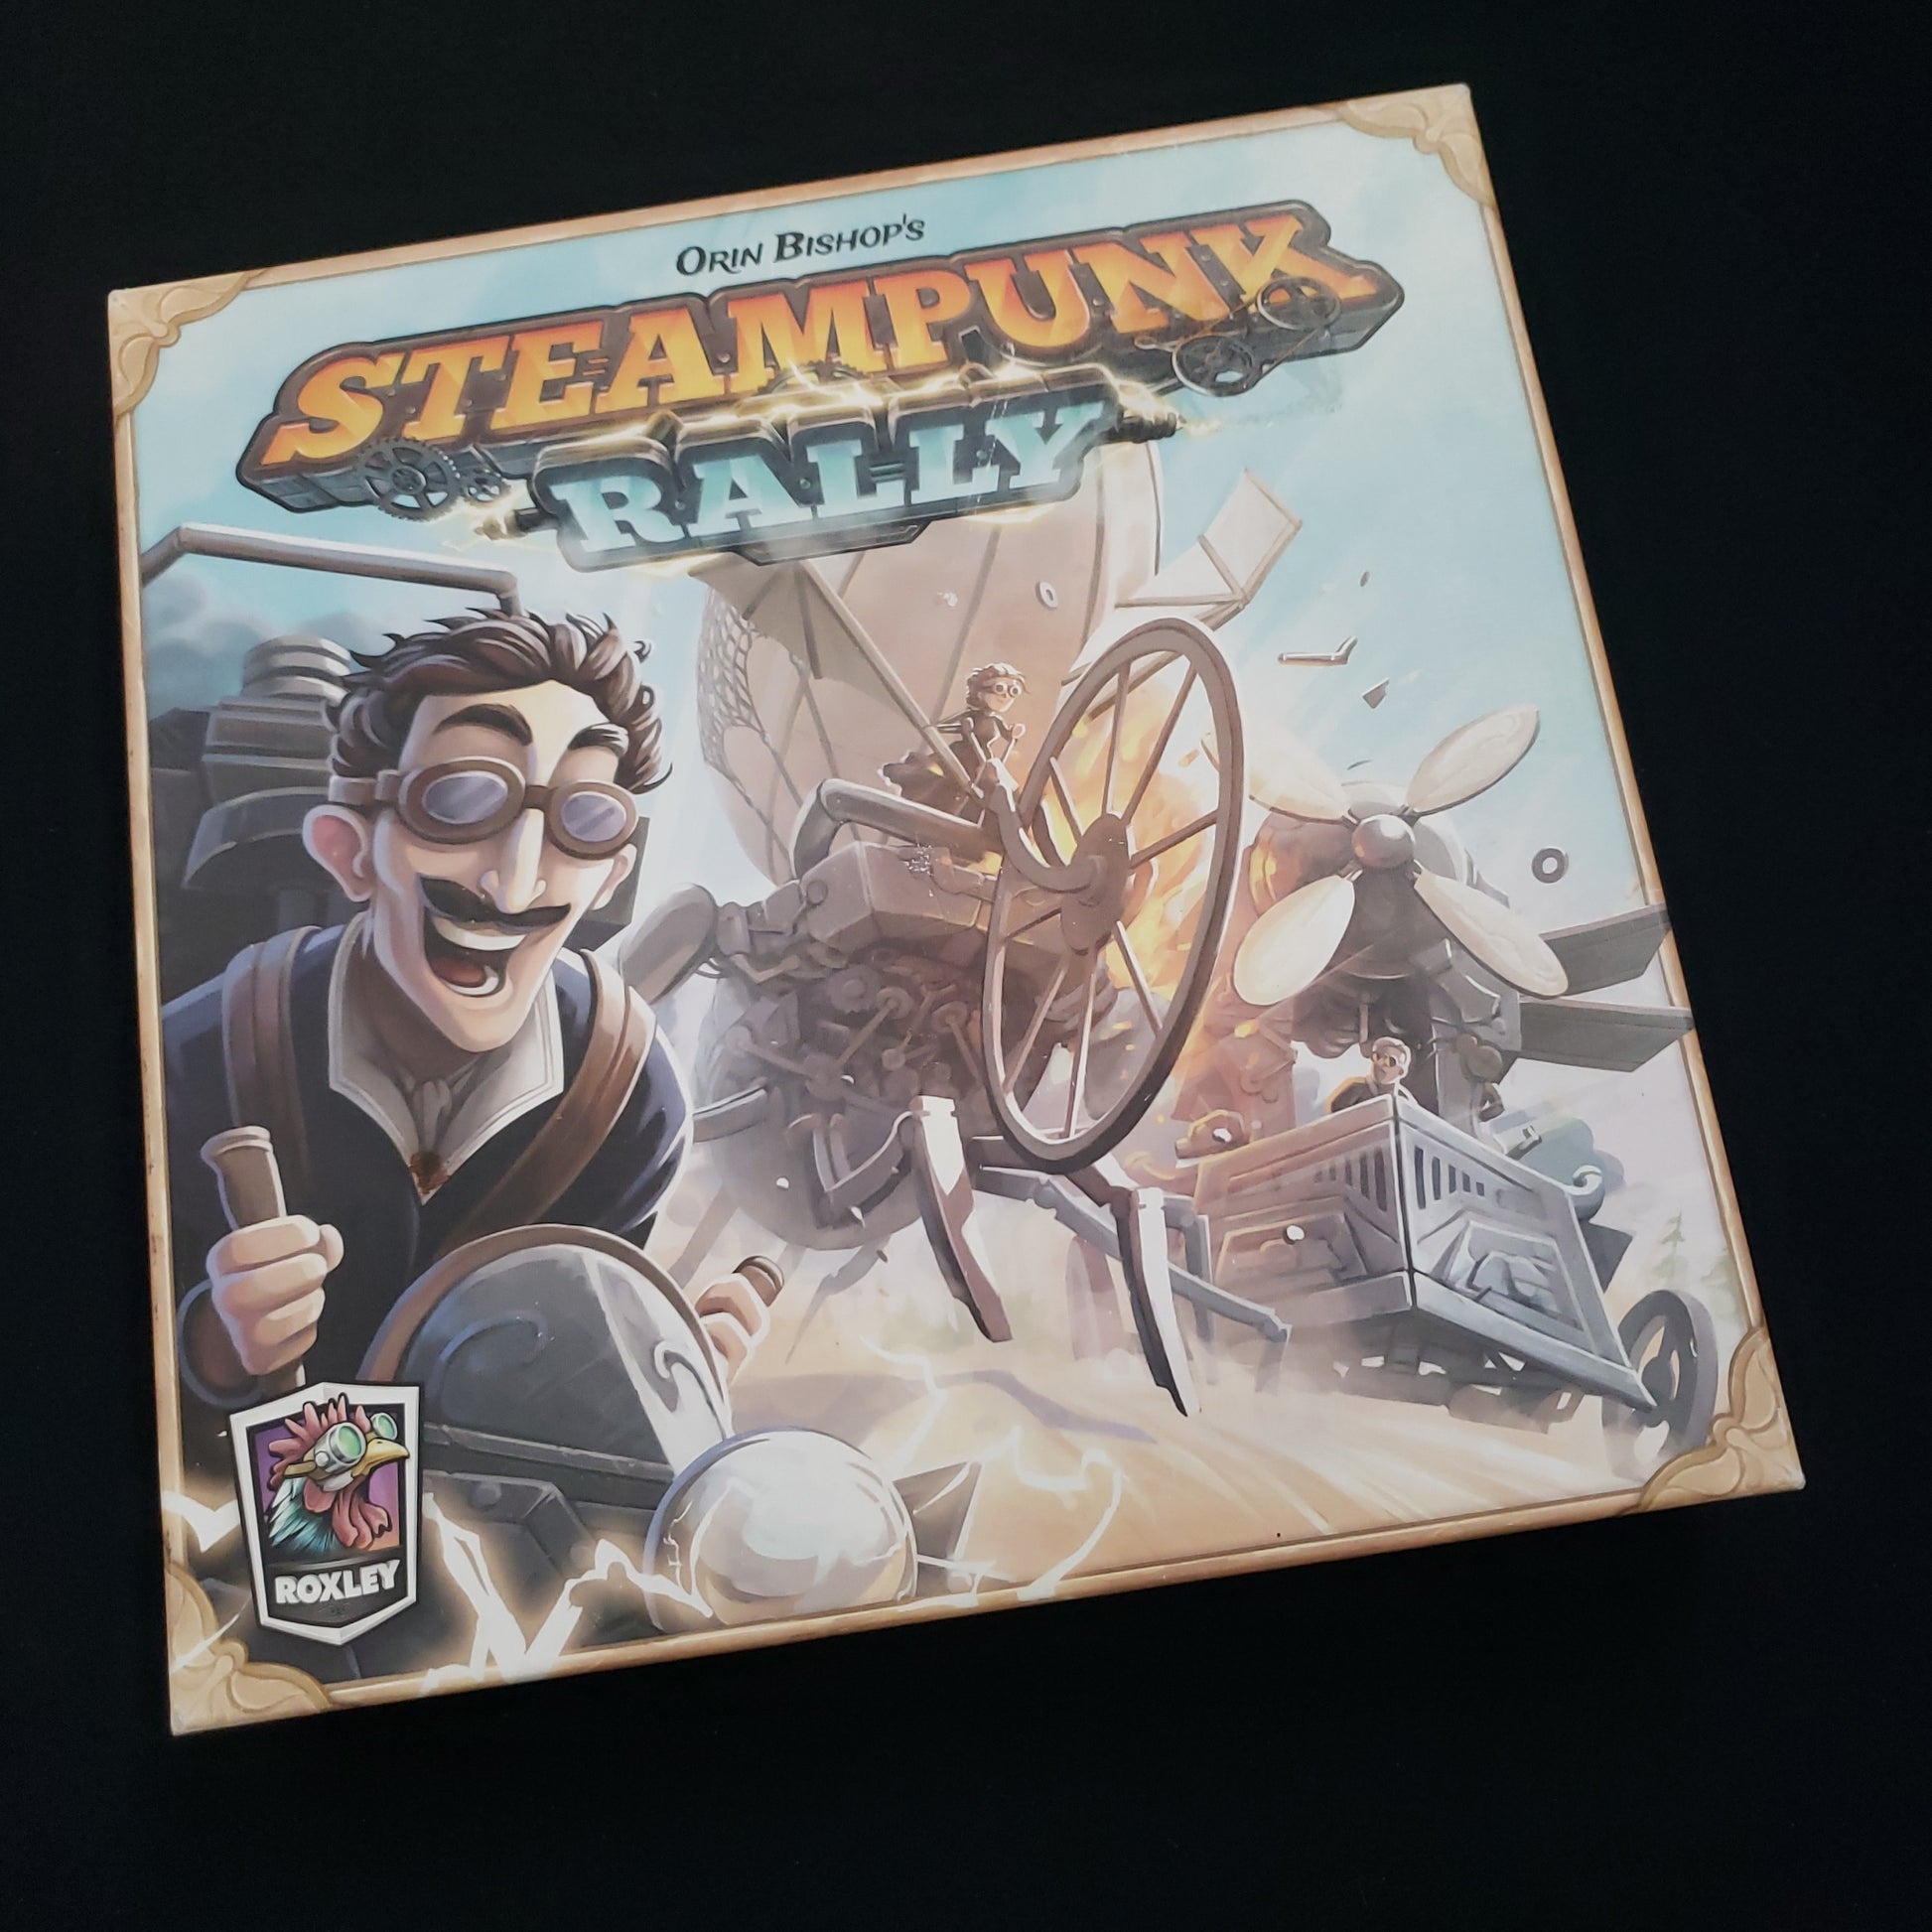 Image shows the front cover of the box of the Steampunk Rally board game